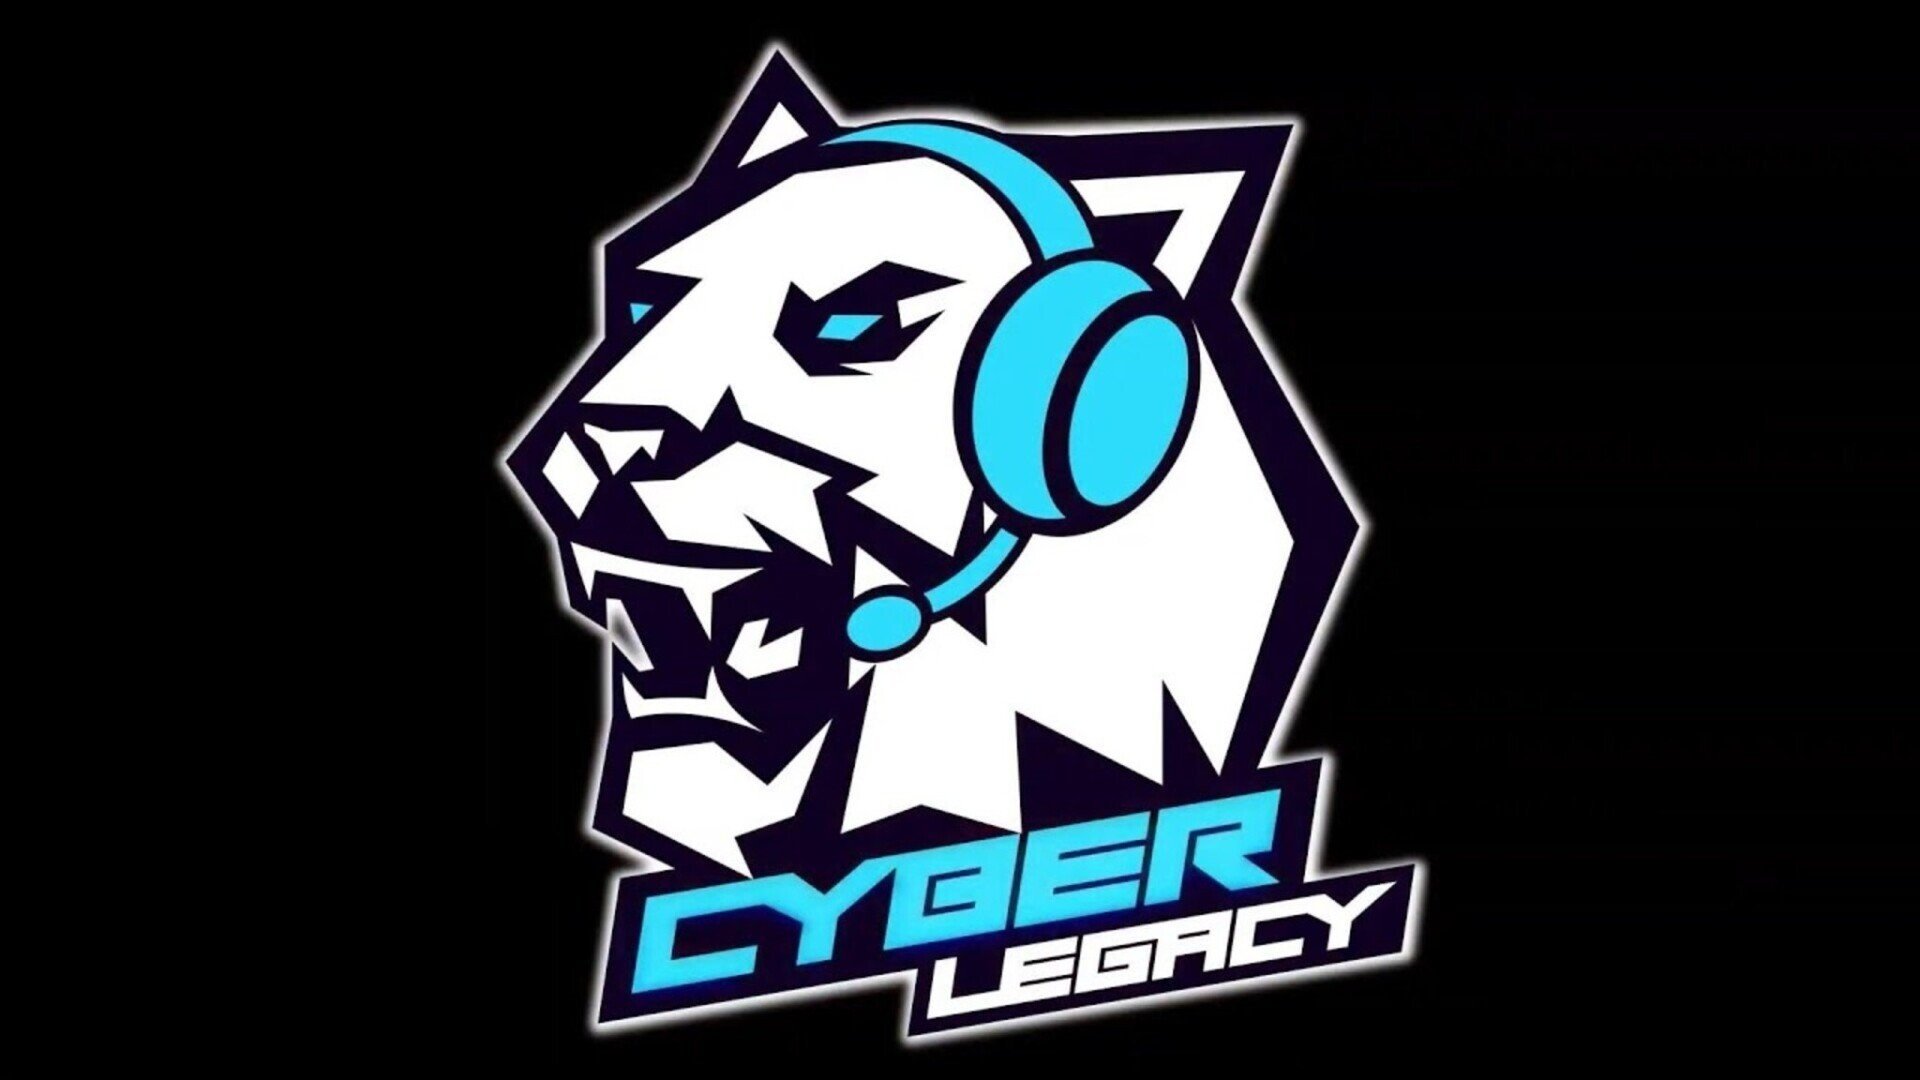 Cyber Legacy rebuilds their squad